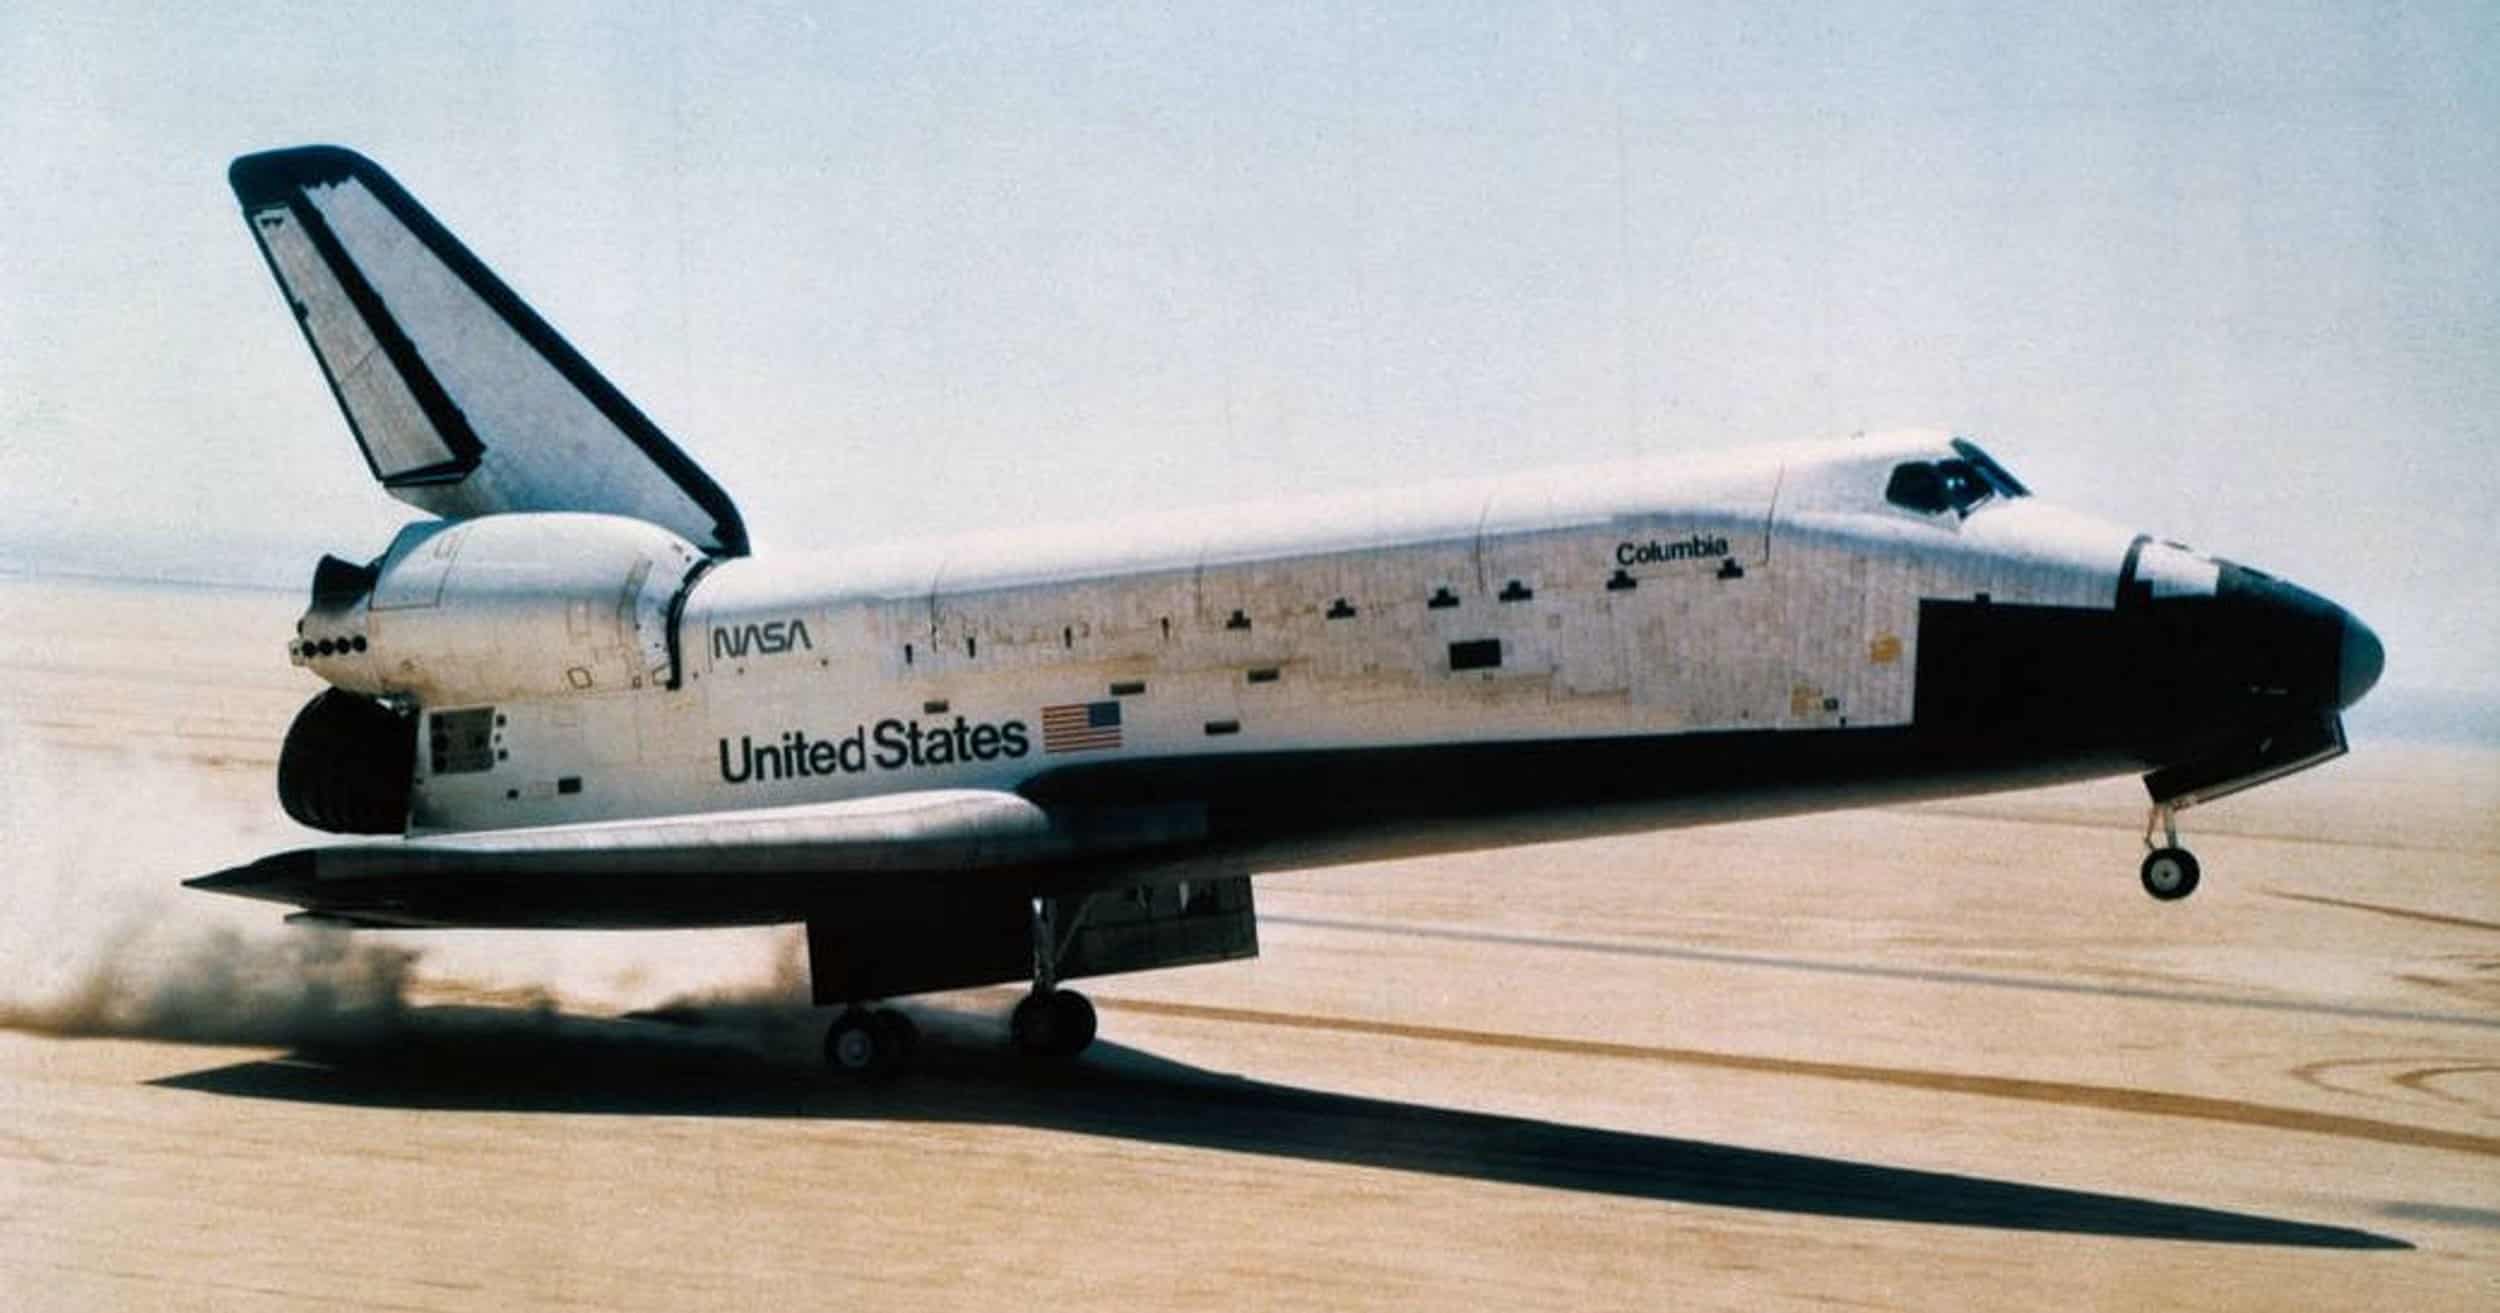 Space Shuttle Columbia's first landing at NASA's Dryden Flight Research Center in 1981. (Source: National Naval Aviation Museum)